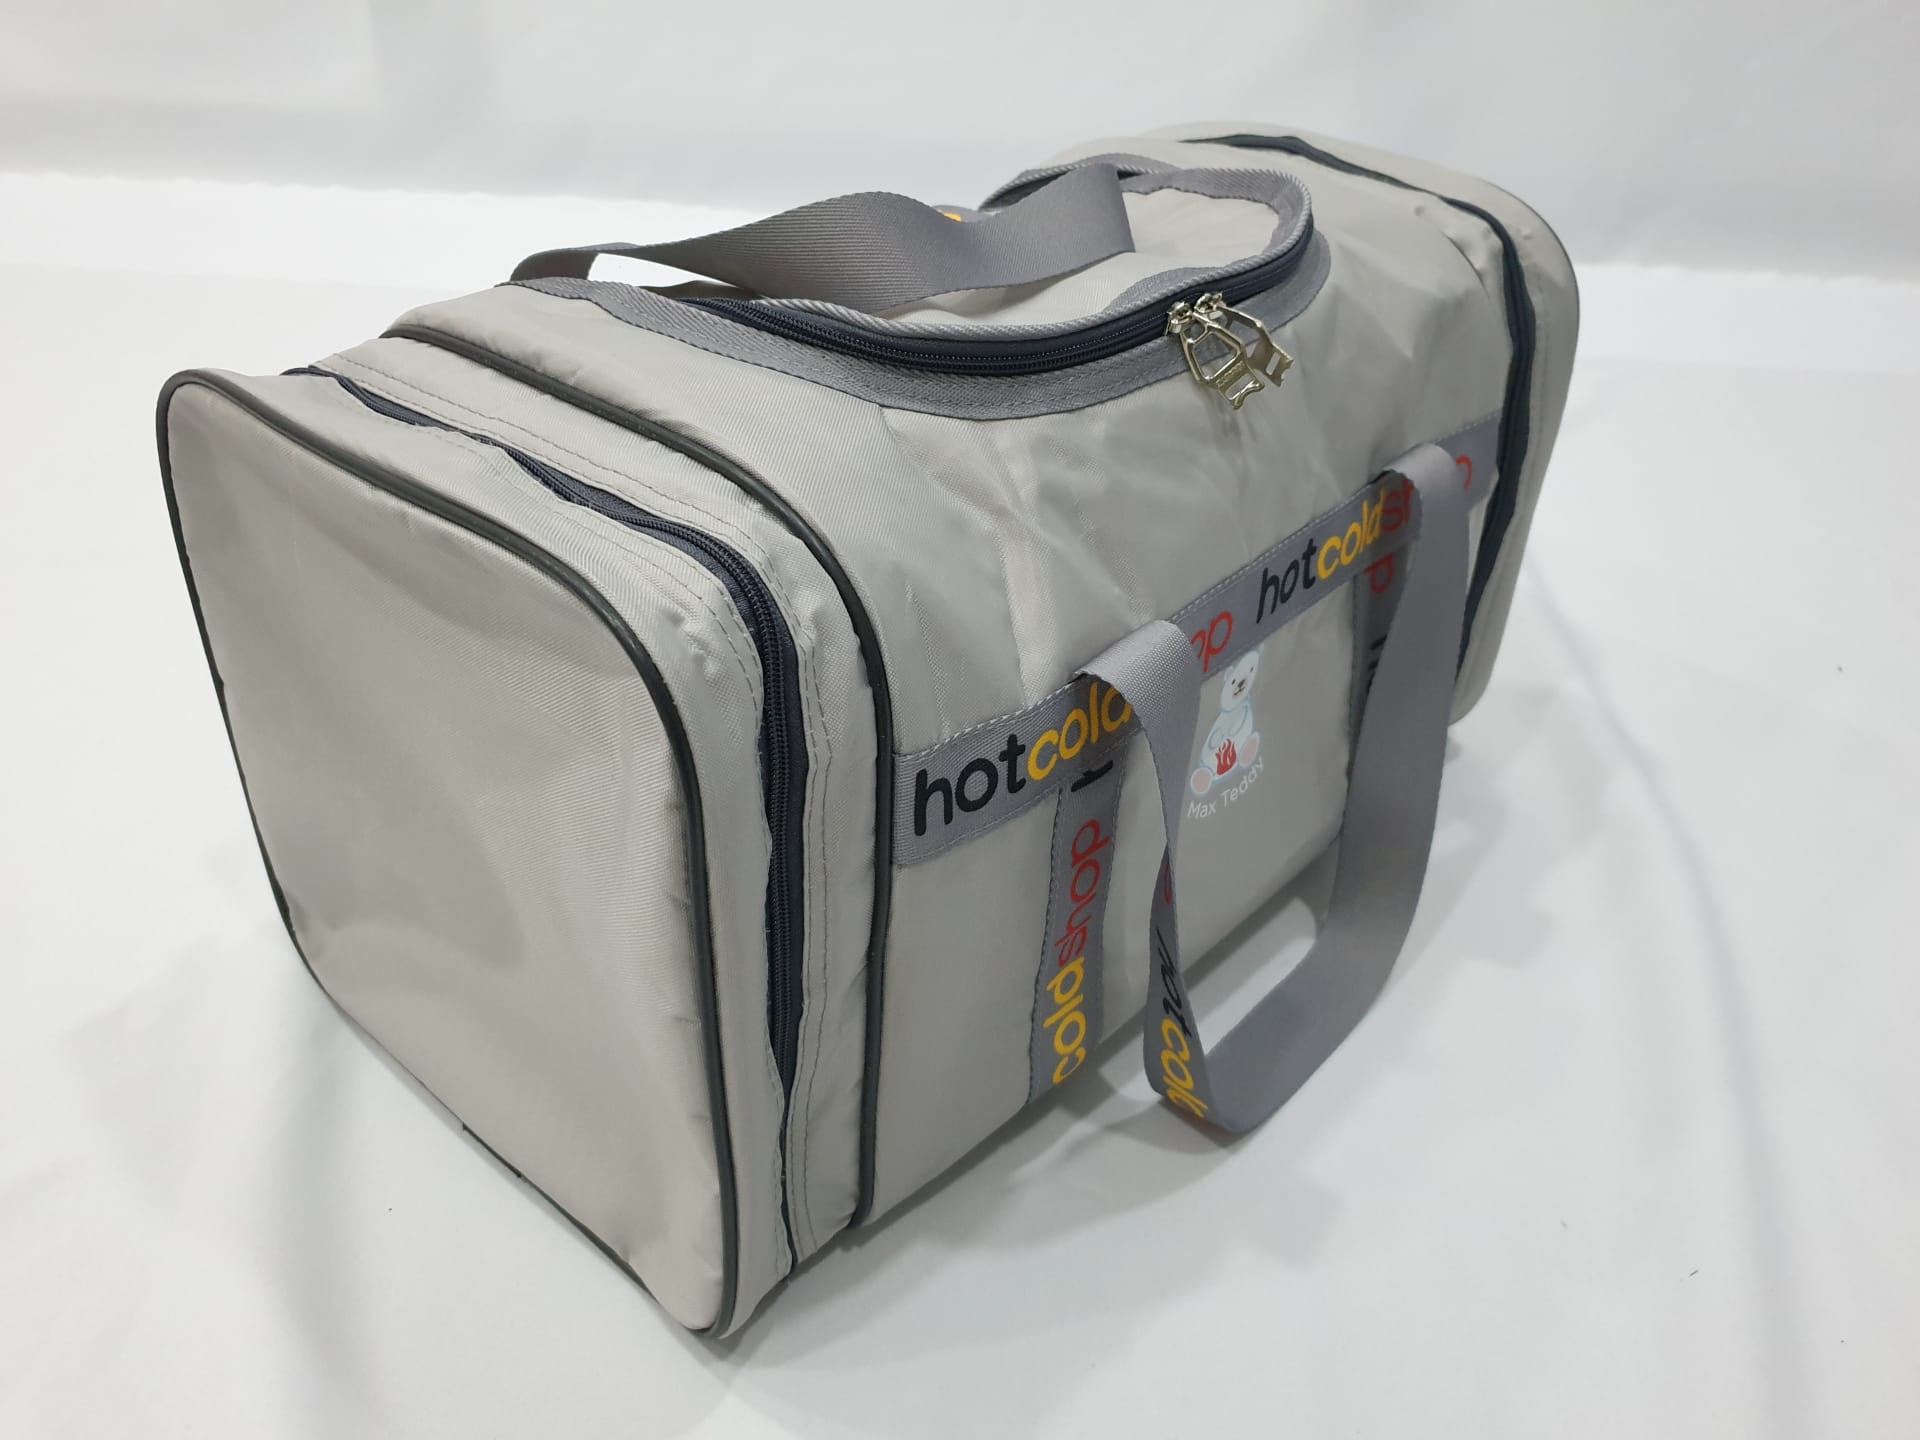 Spacious sports bag with separate compartments to keep your belongings conveniently separated.